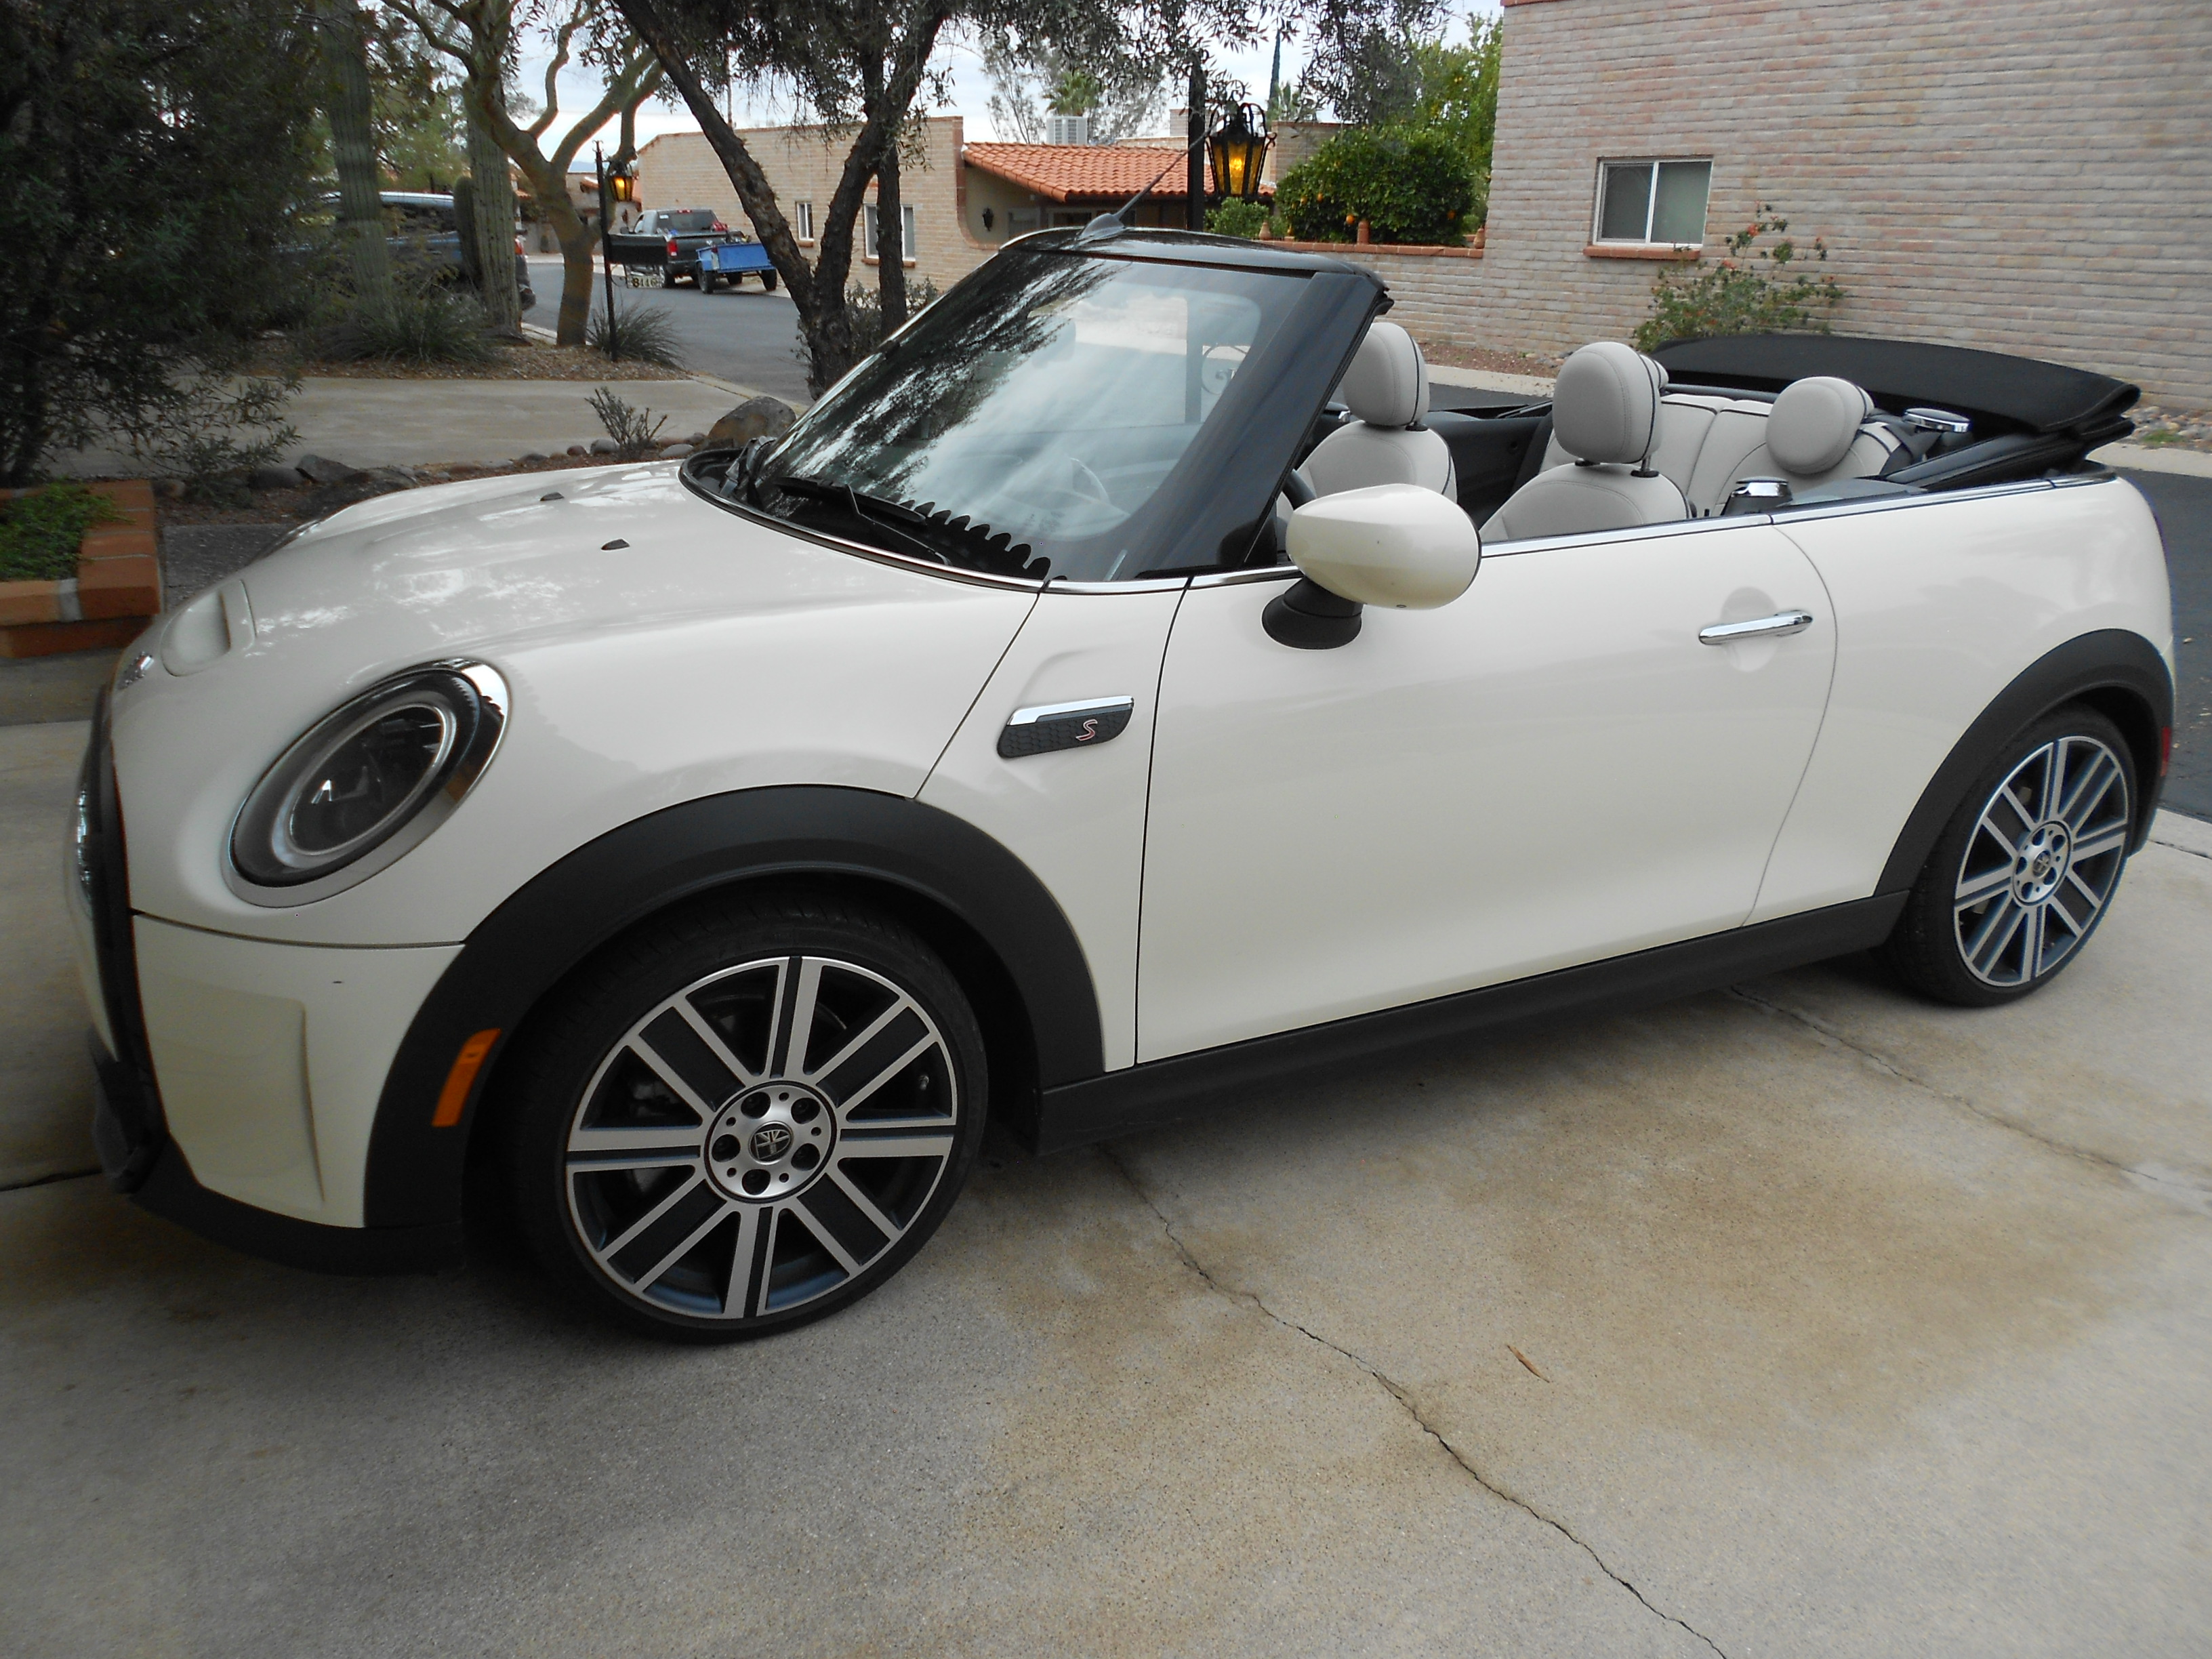 Used MINI Cooper for Sale Right Now - Autotrader